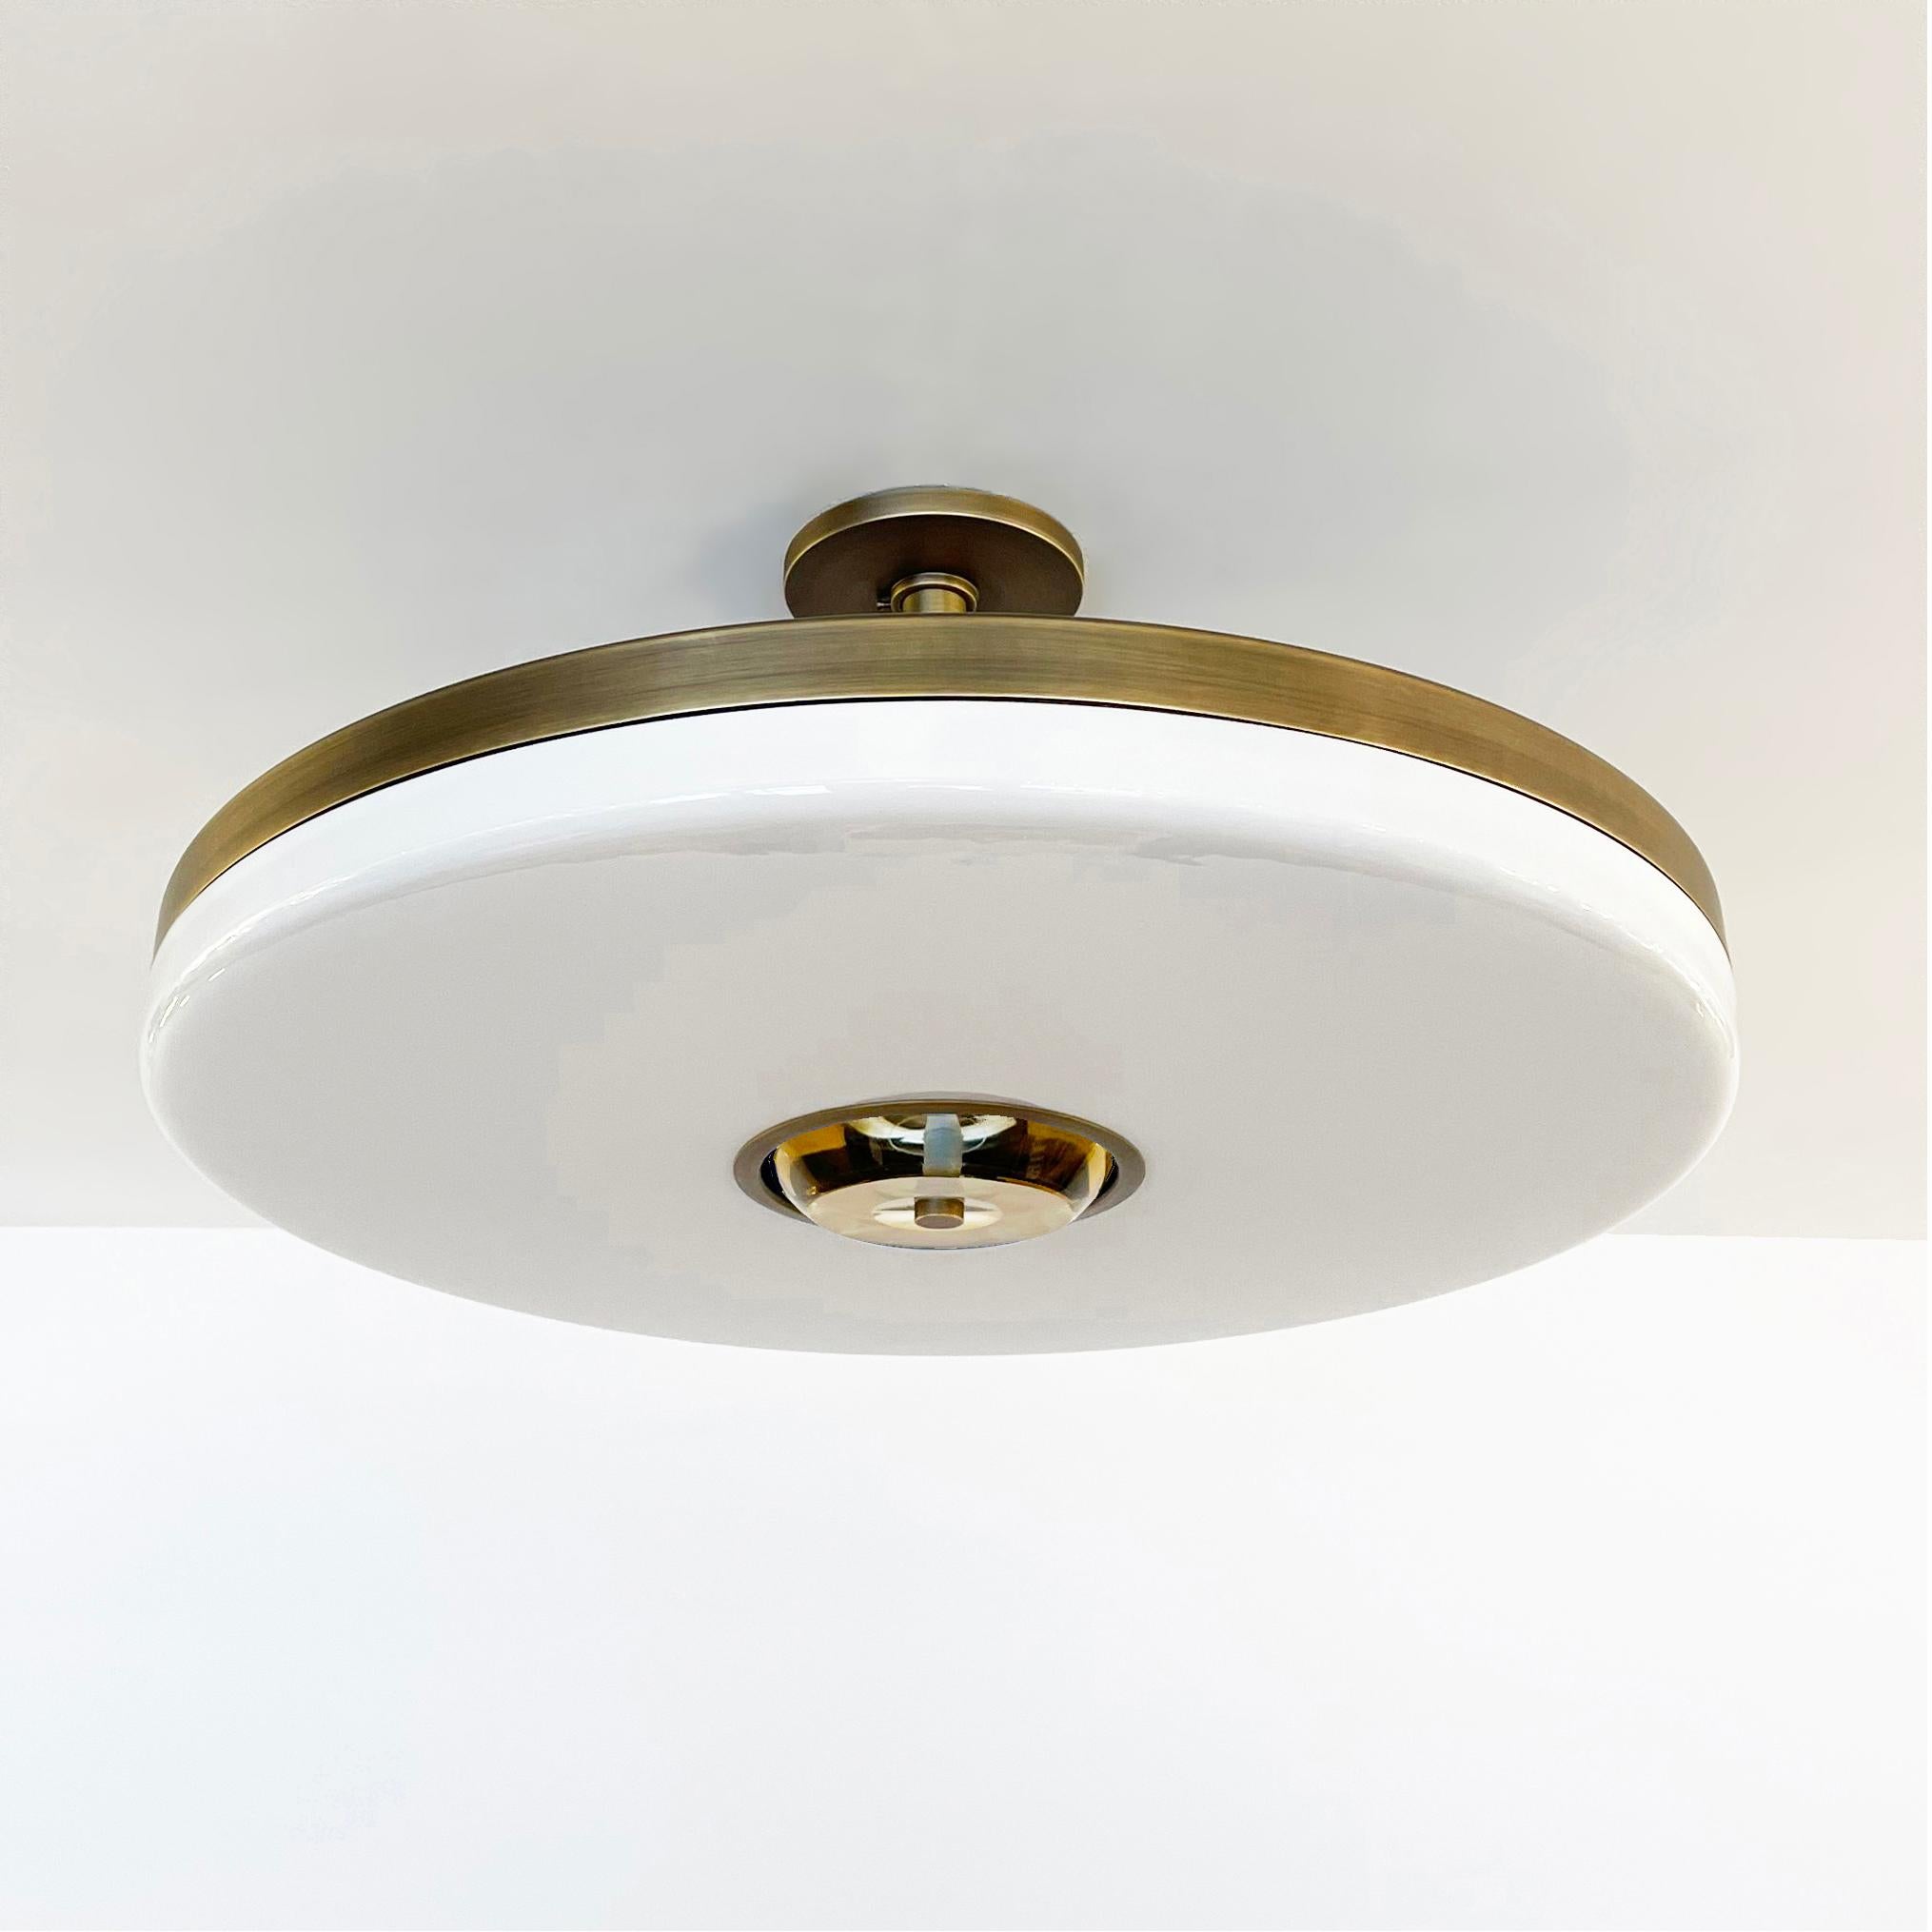 Iris Ceiling Light by Gaspare Asaro-Satin Brass Finish For Sale 5